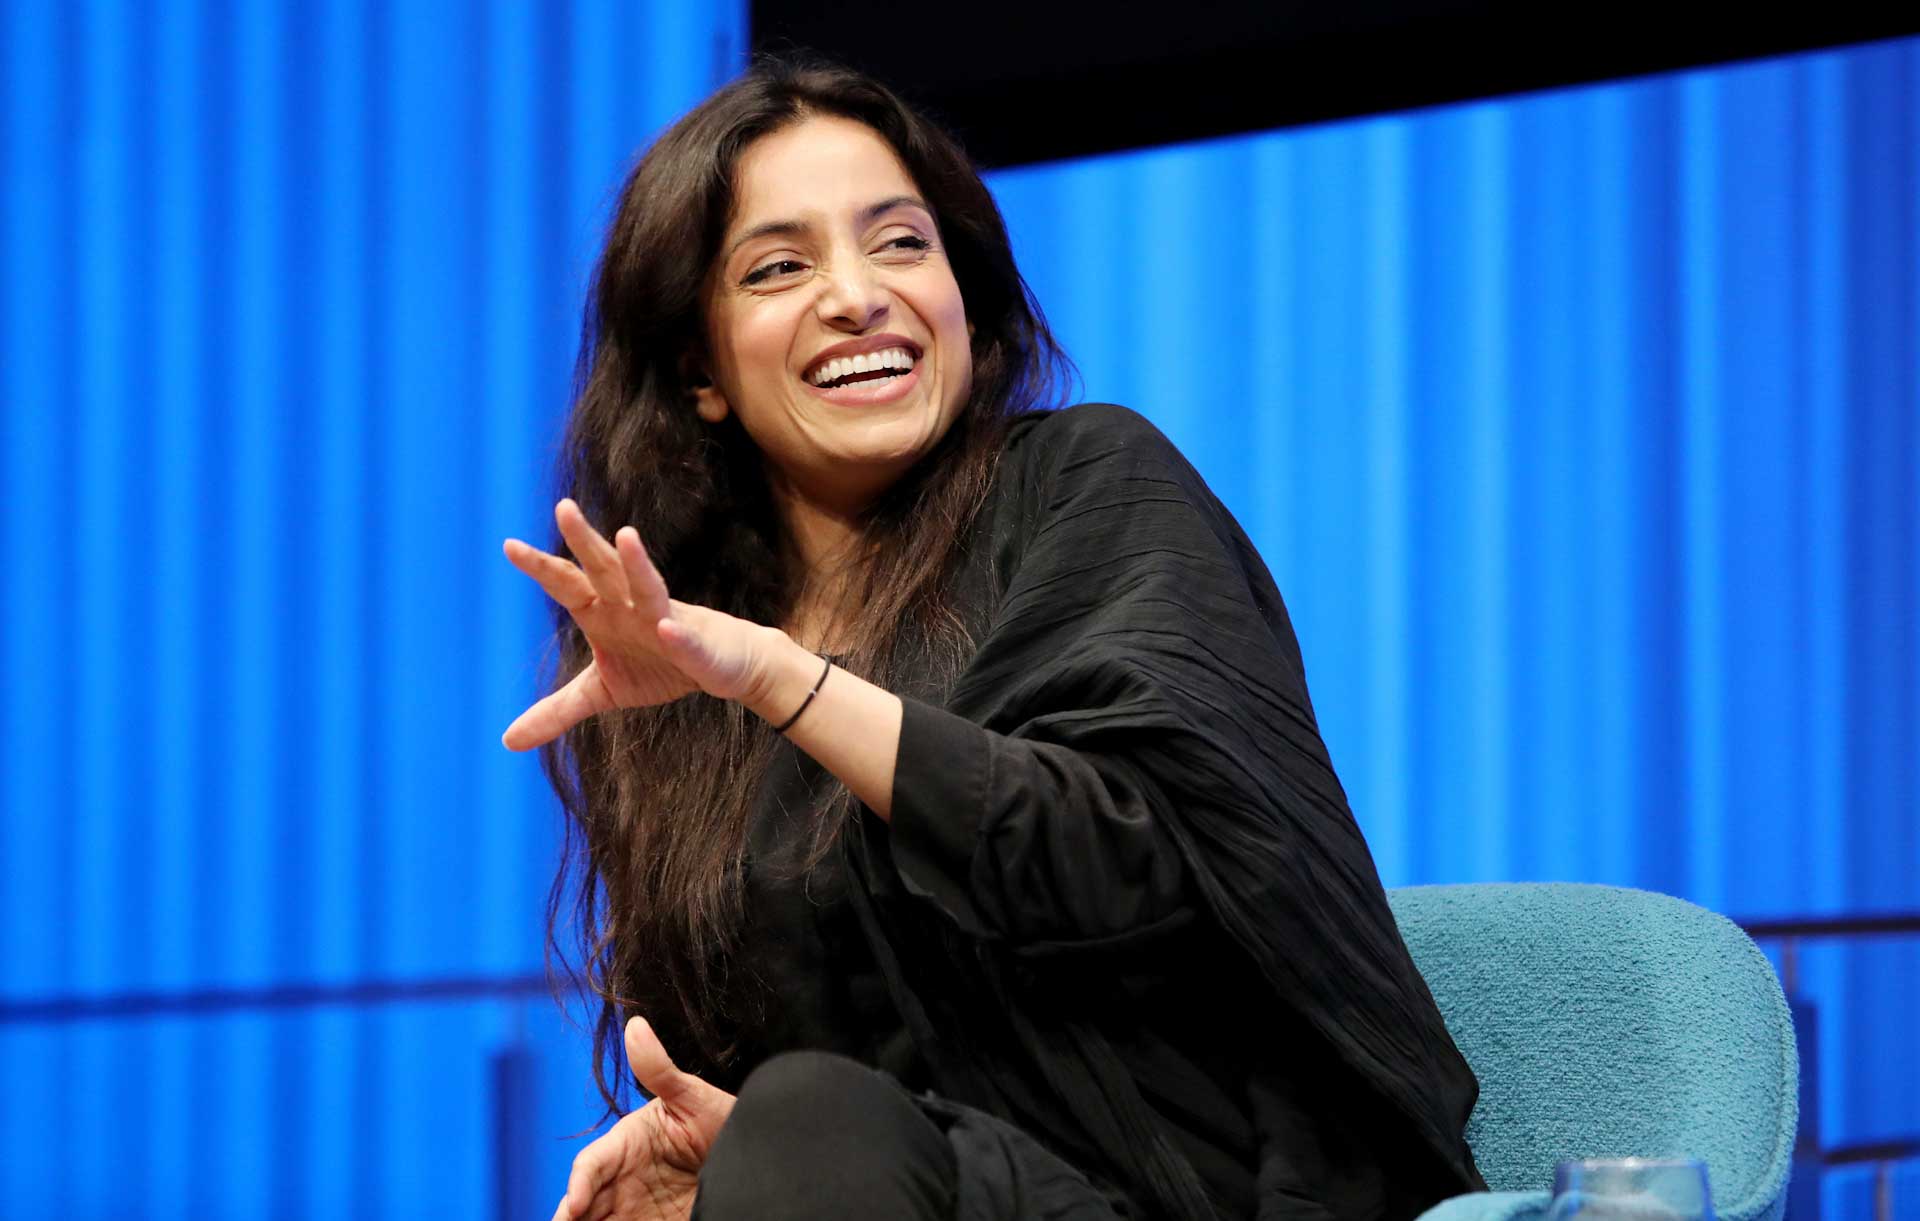 Emmy Award–winning documentarian Deeyah Khan smiles as she leans forward and gestures with her left hand onstage while speaking during a public program at the Museum Auditorium. Curtains behind her are lit up blue.